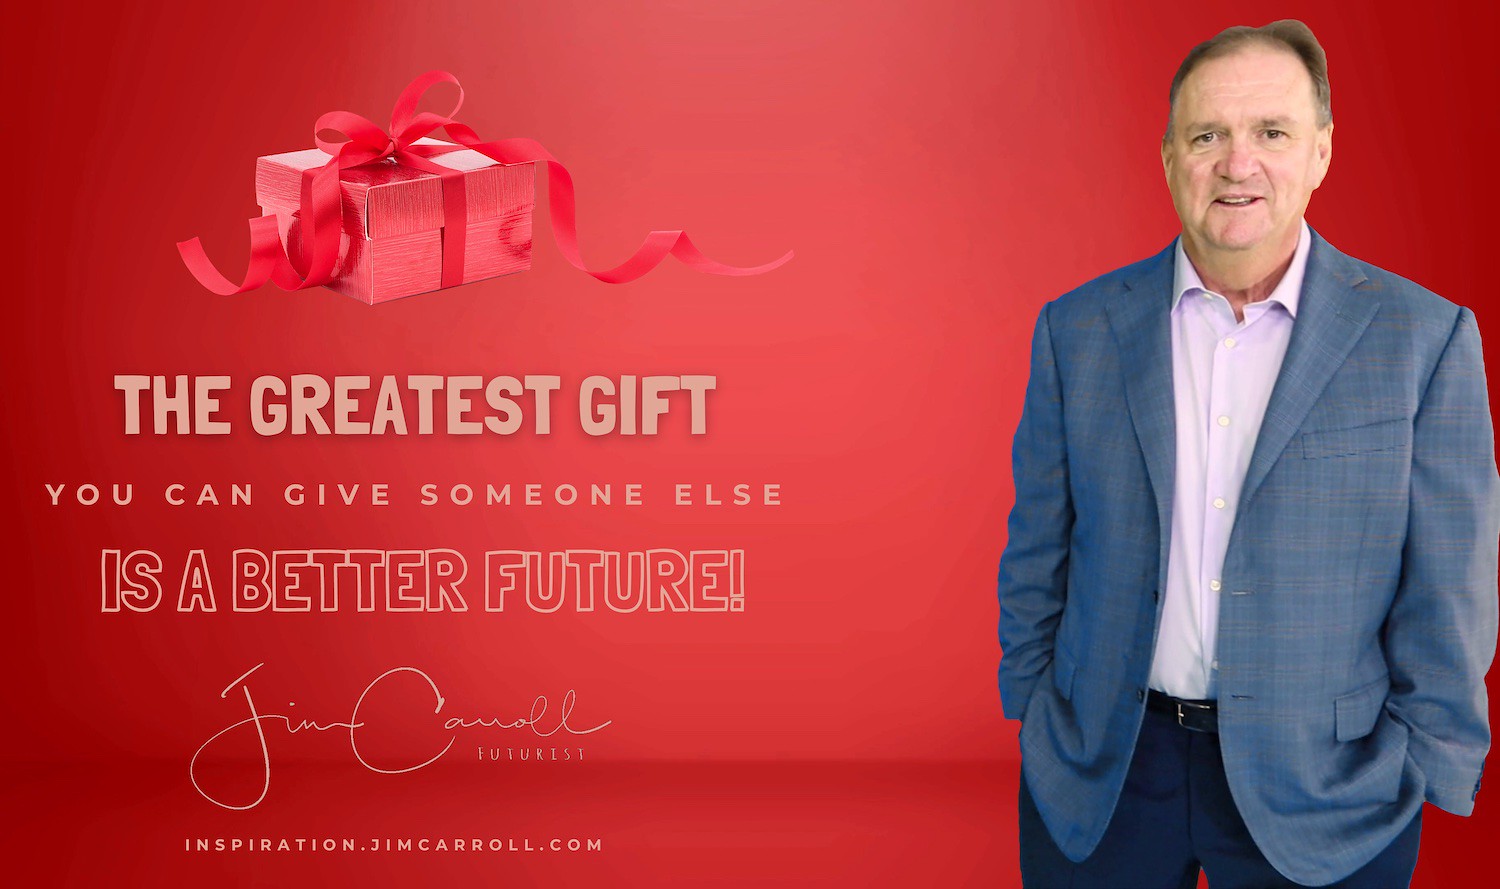 "The greatest gift you can give someone else is a better future!" - Futurist Jim Carroll